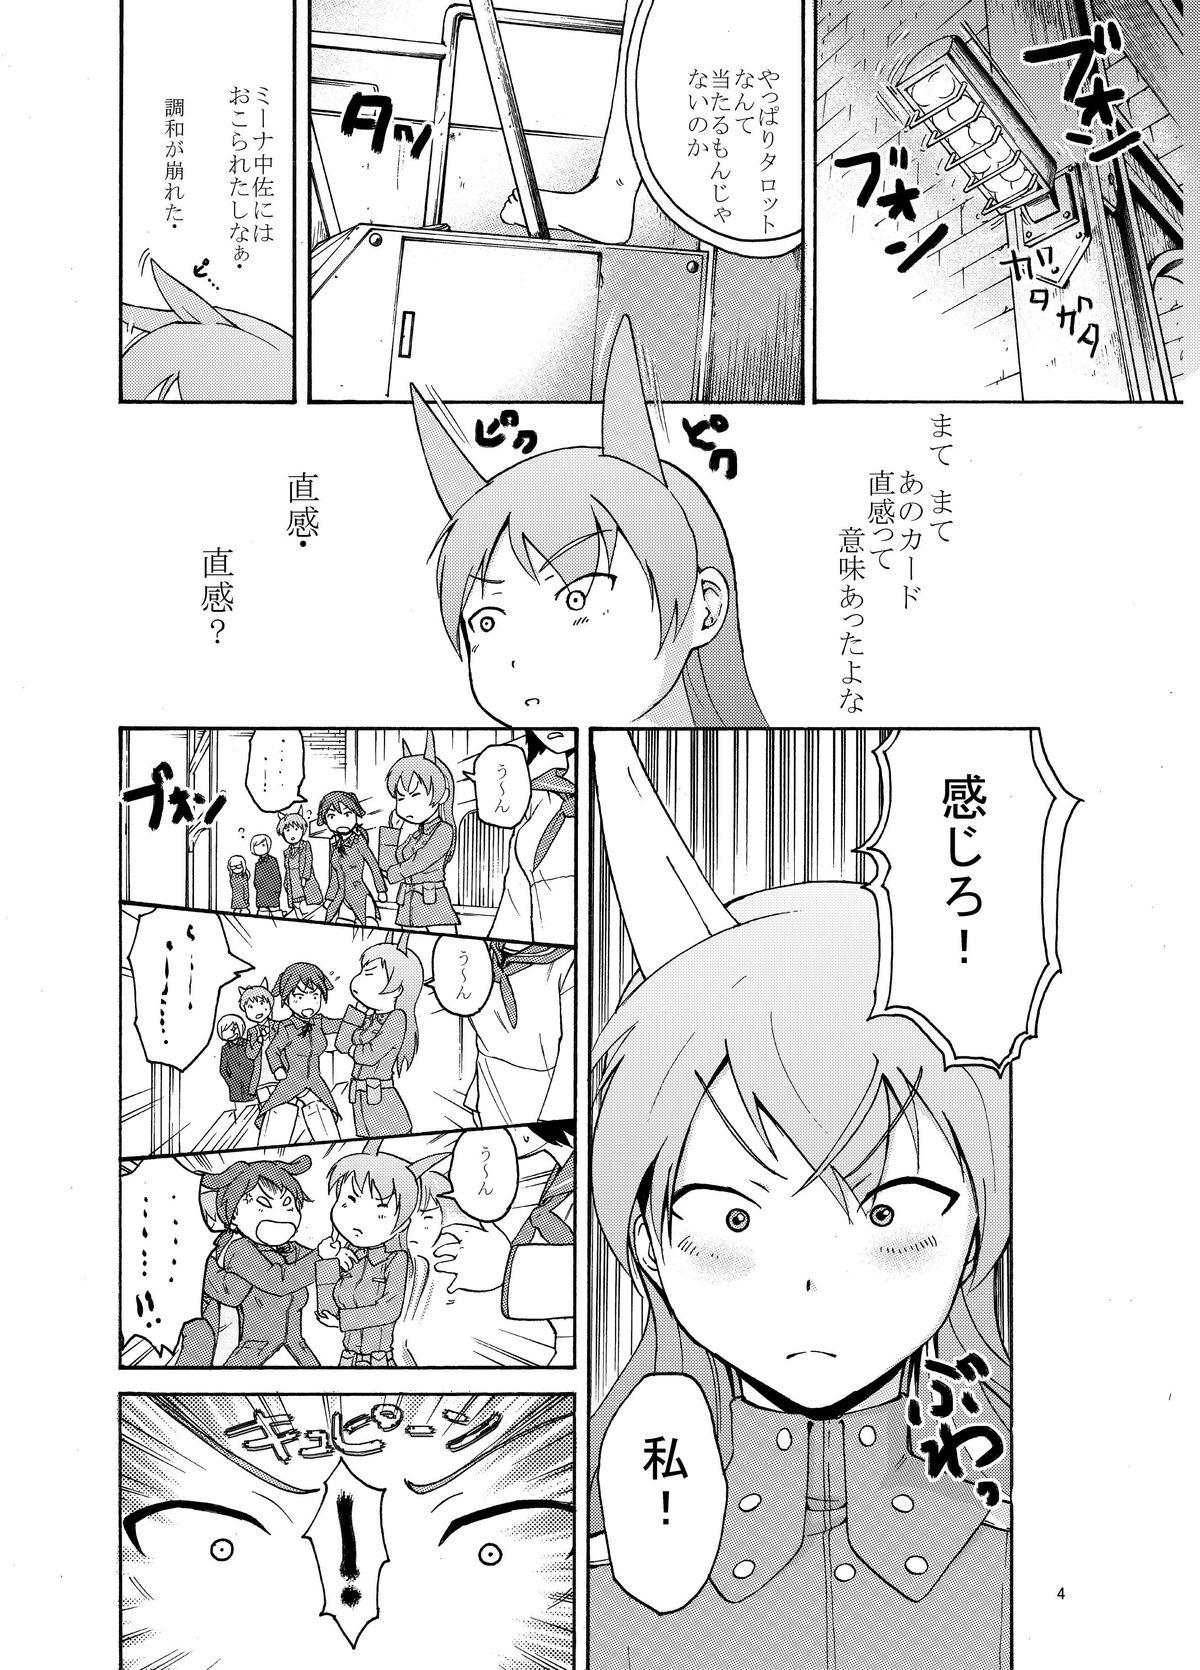 Passivo Eila no Lovers Tarot - Strike witches Pounding - Page 5